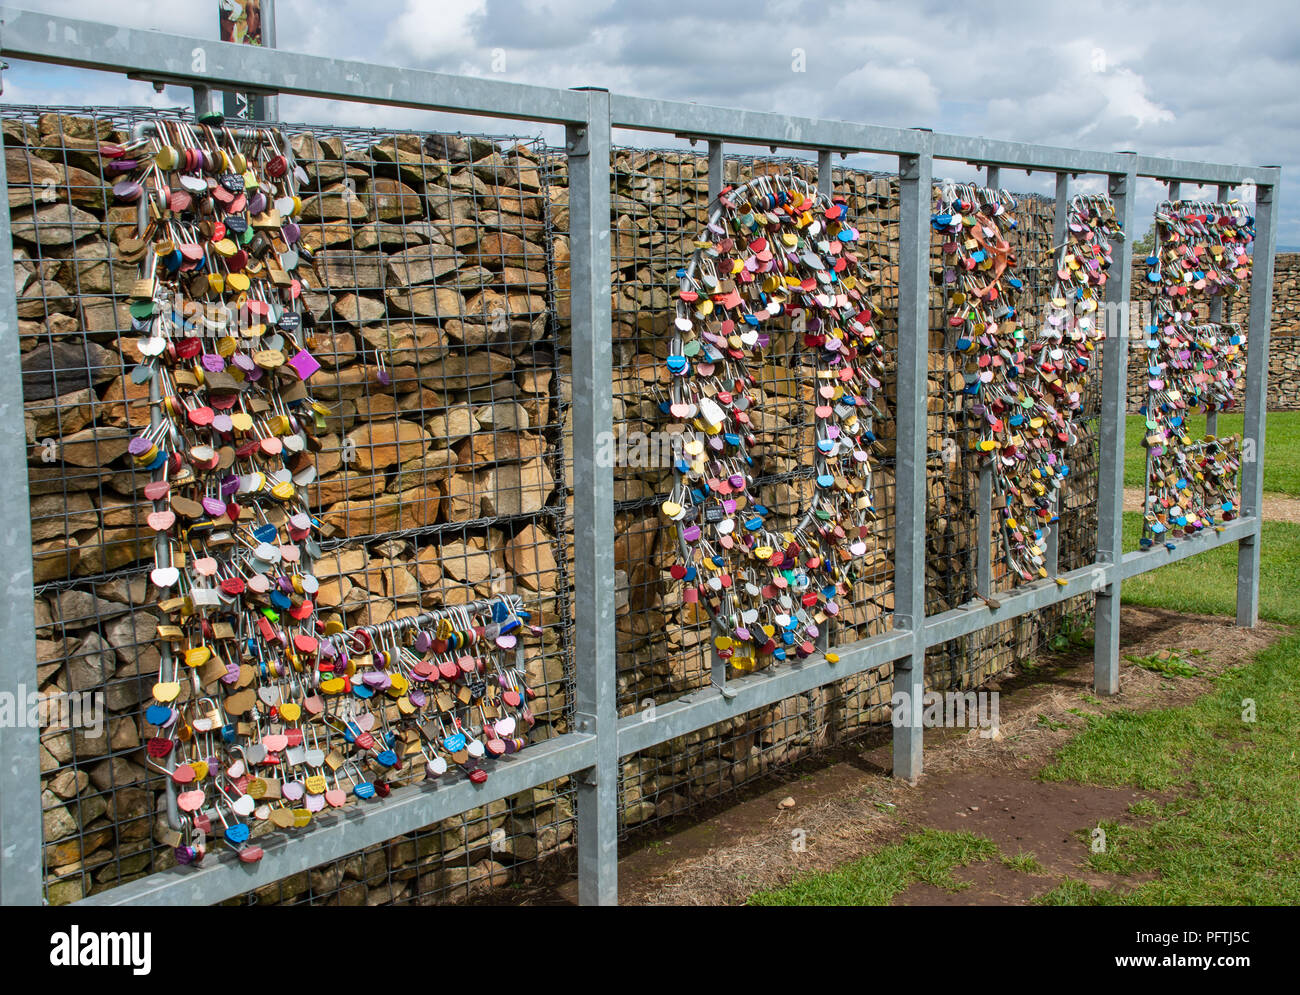 Gretna Green, United Kingdom - August 08 2018:   A collection of love locks - padlocks with personal messages on them, shaped into the word LOVE near  Stock Photo